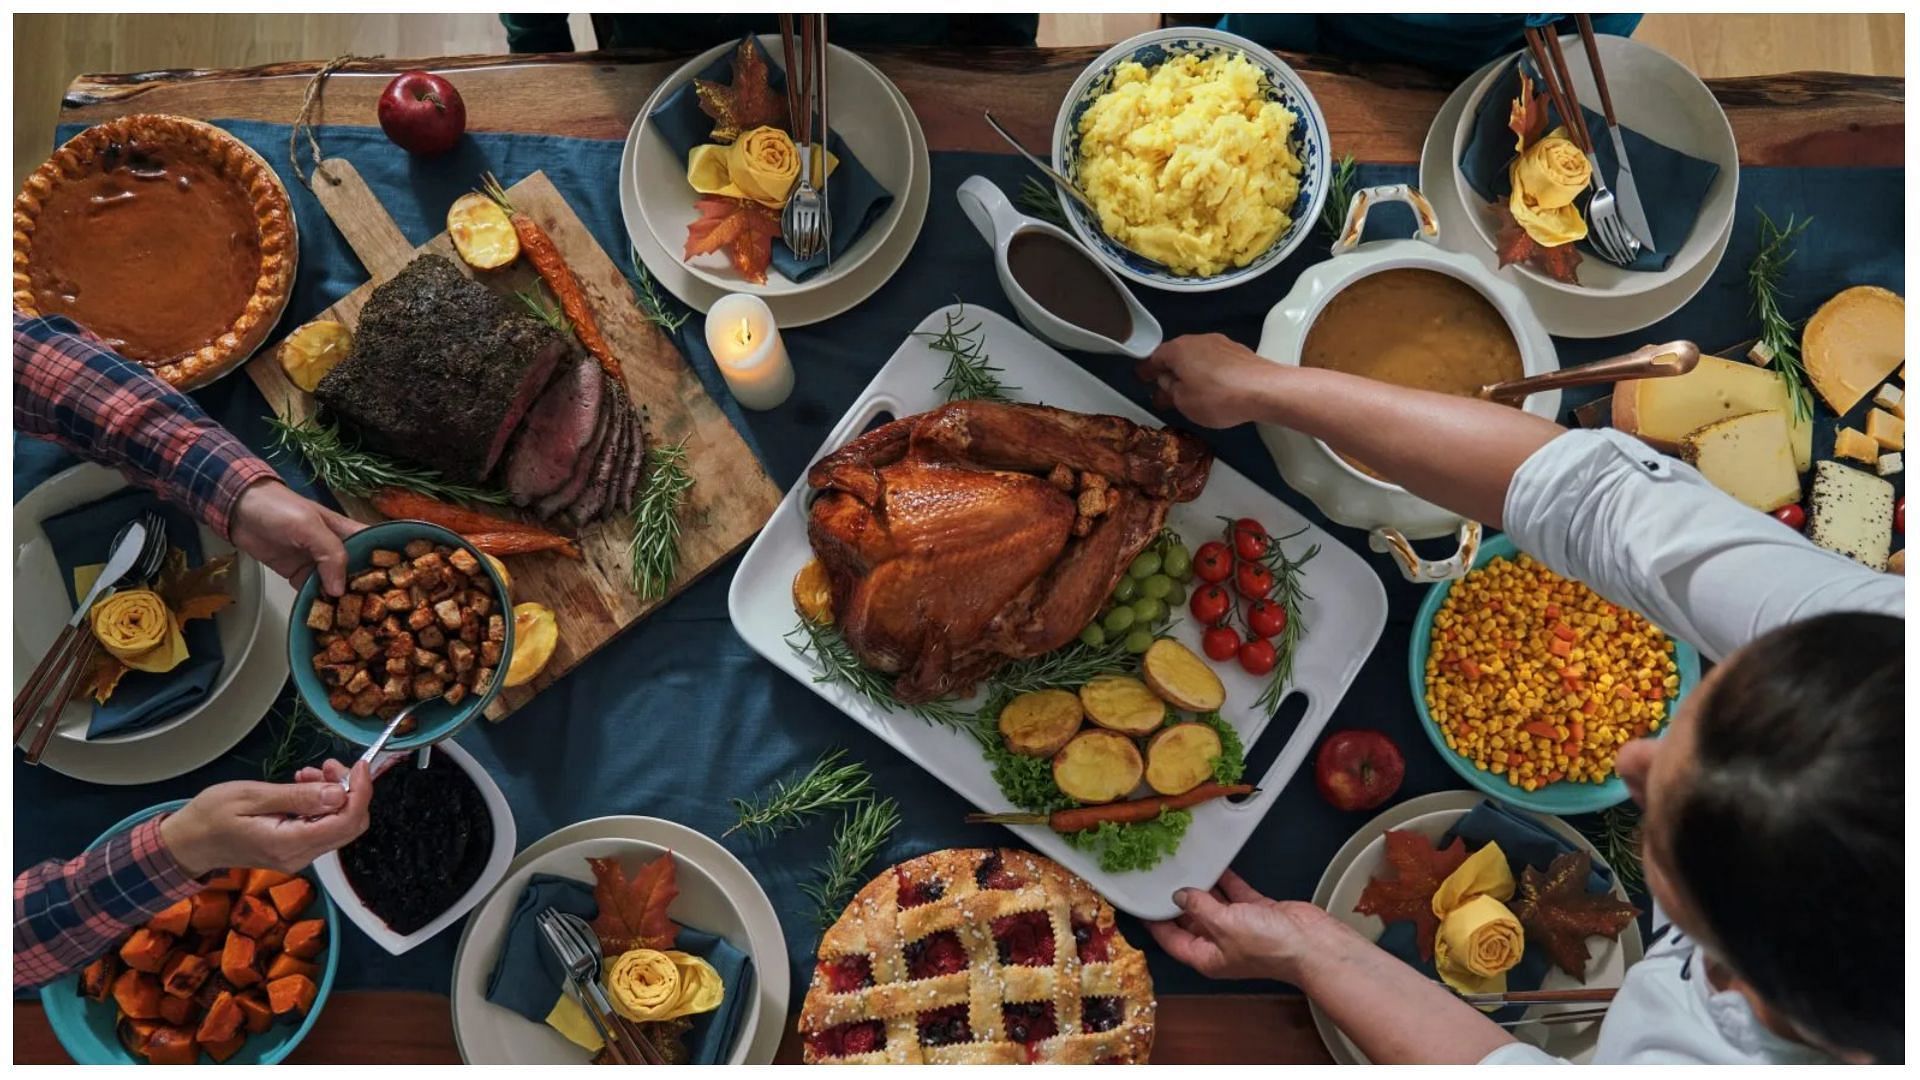 Thanksgiving platter with a Stuffed Turkey, Pumpkin Pie, Peas, and more (Image via GettyImages)